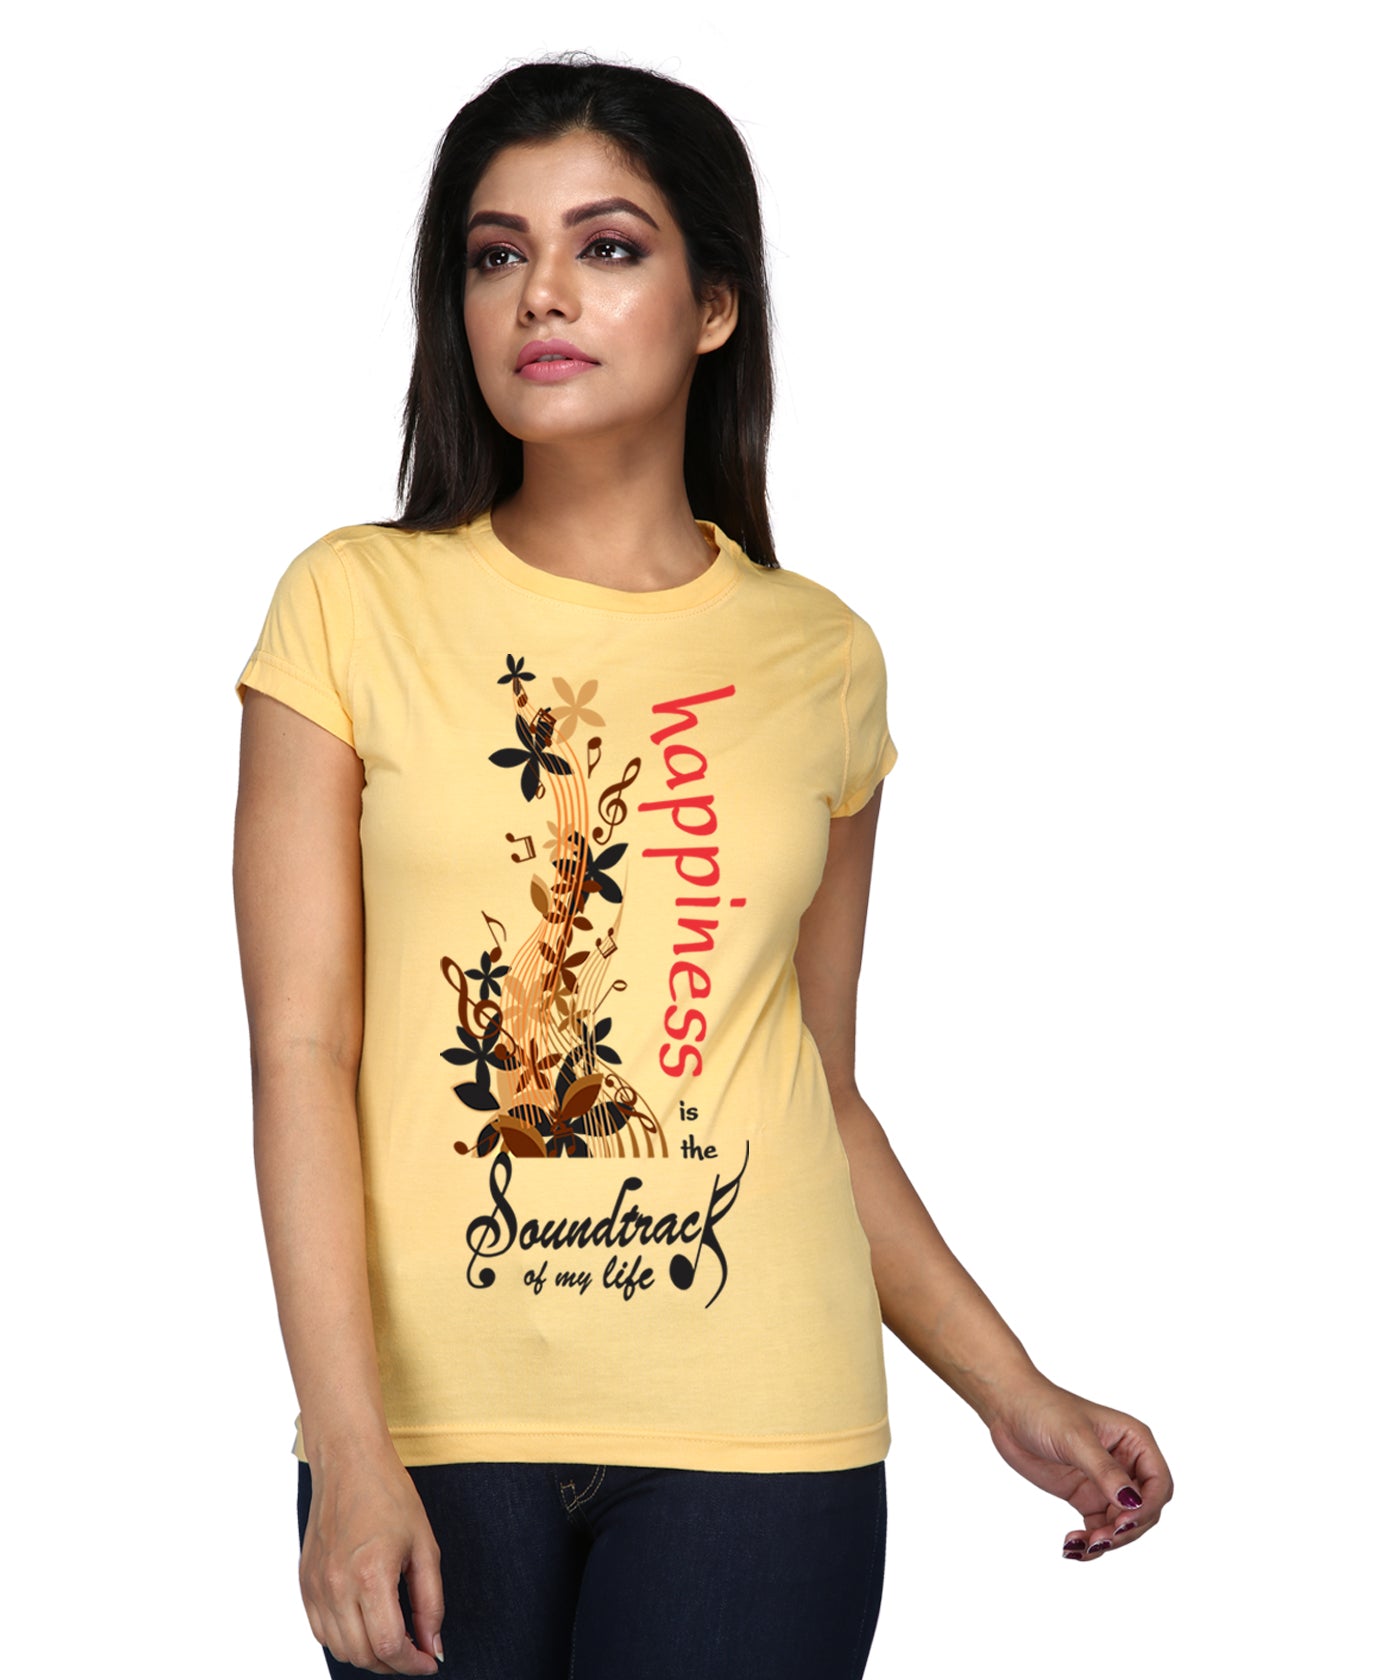 Happiness Is - Premium Round Neck Cotton Tees for Women - Golden Yellow